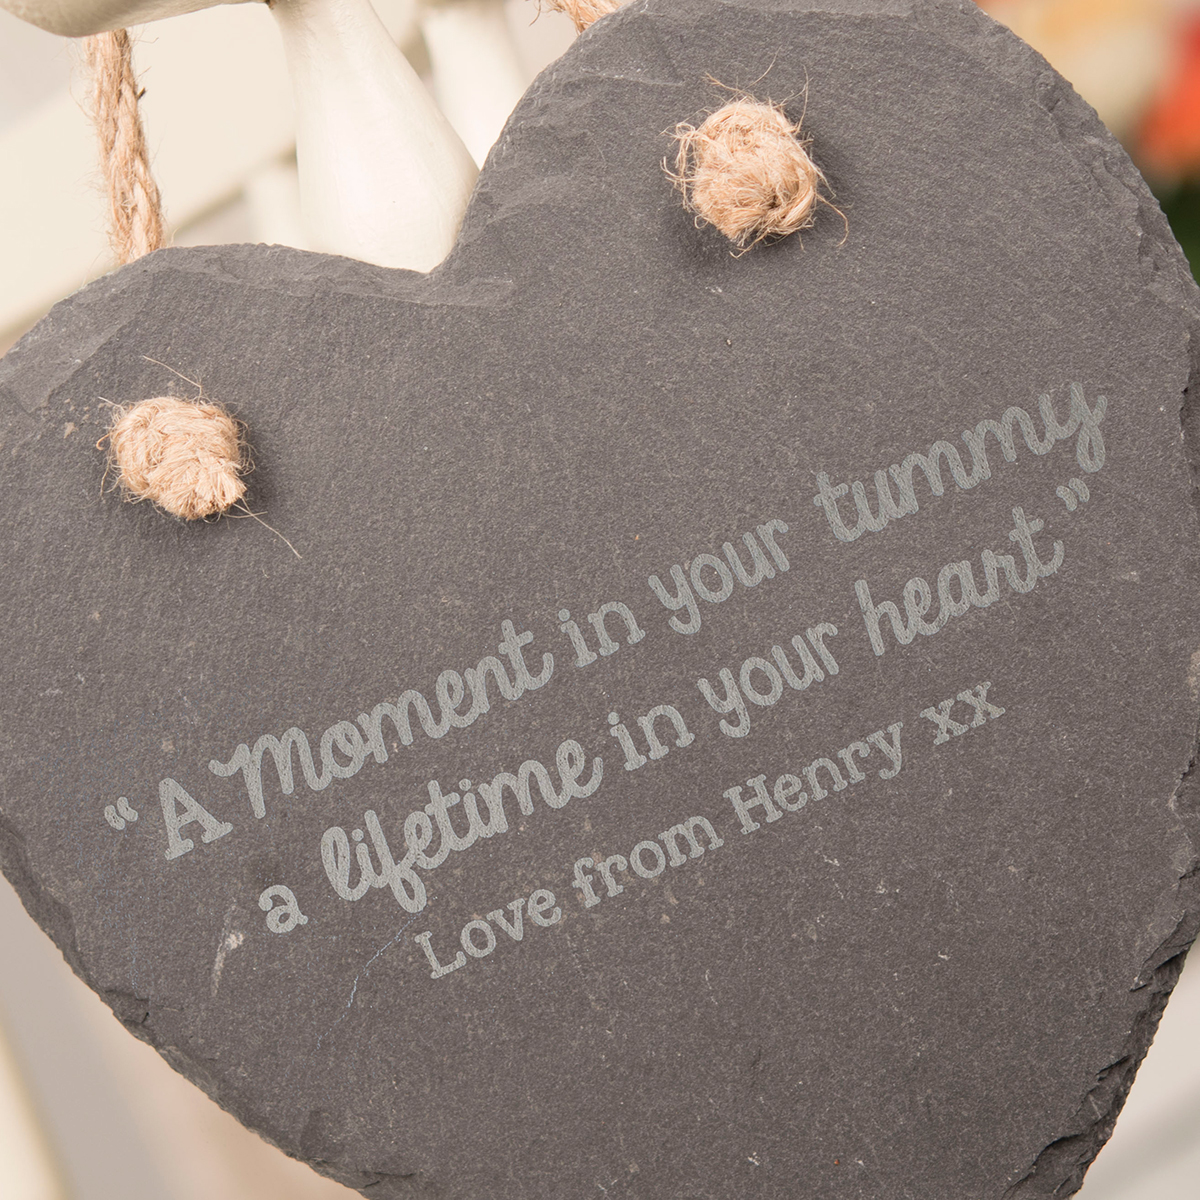 Personalised Engraved Medium Hanging Heart Slate - In Your Tummy